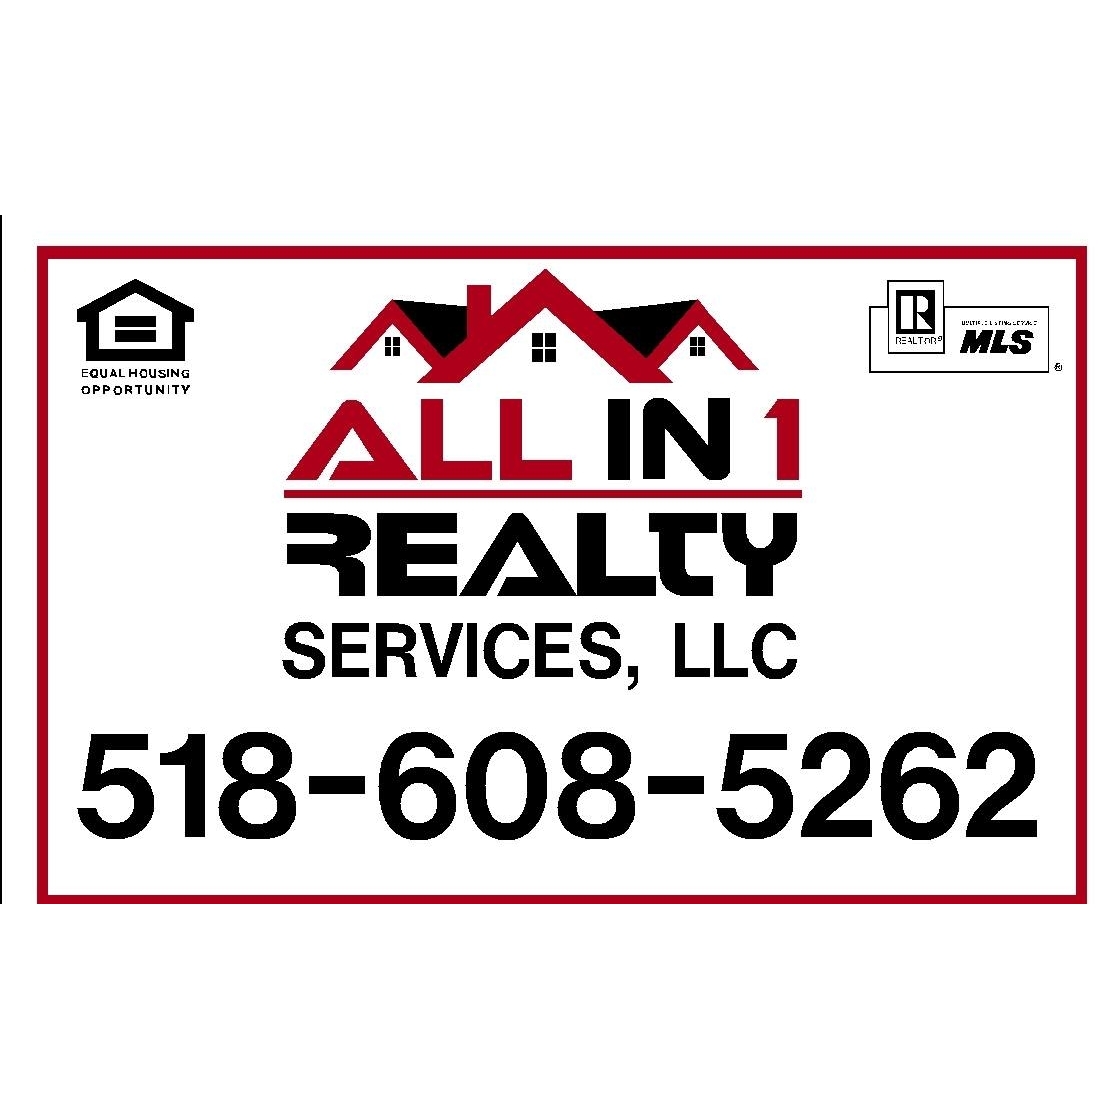 All In 1 Realty Services, LLC